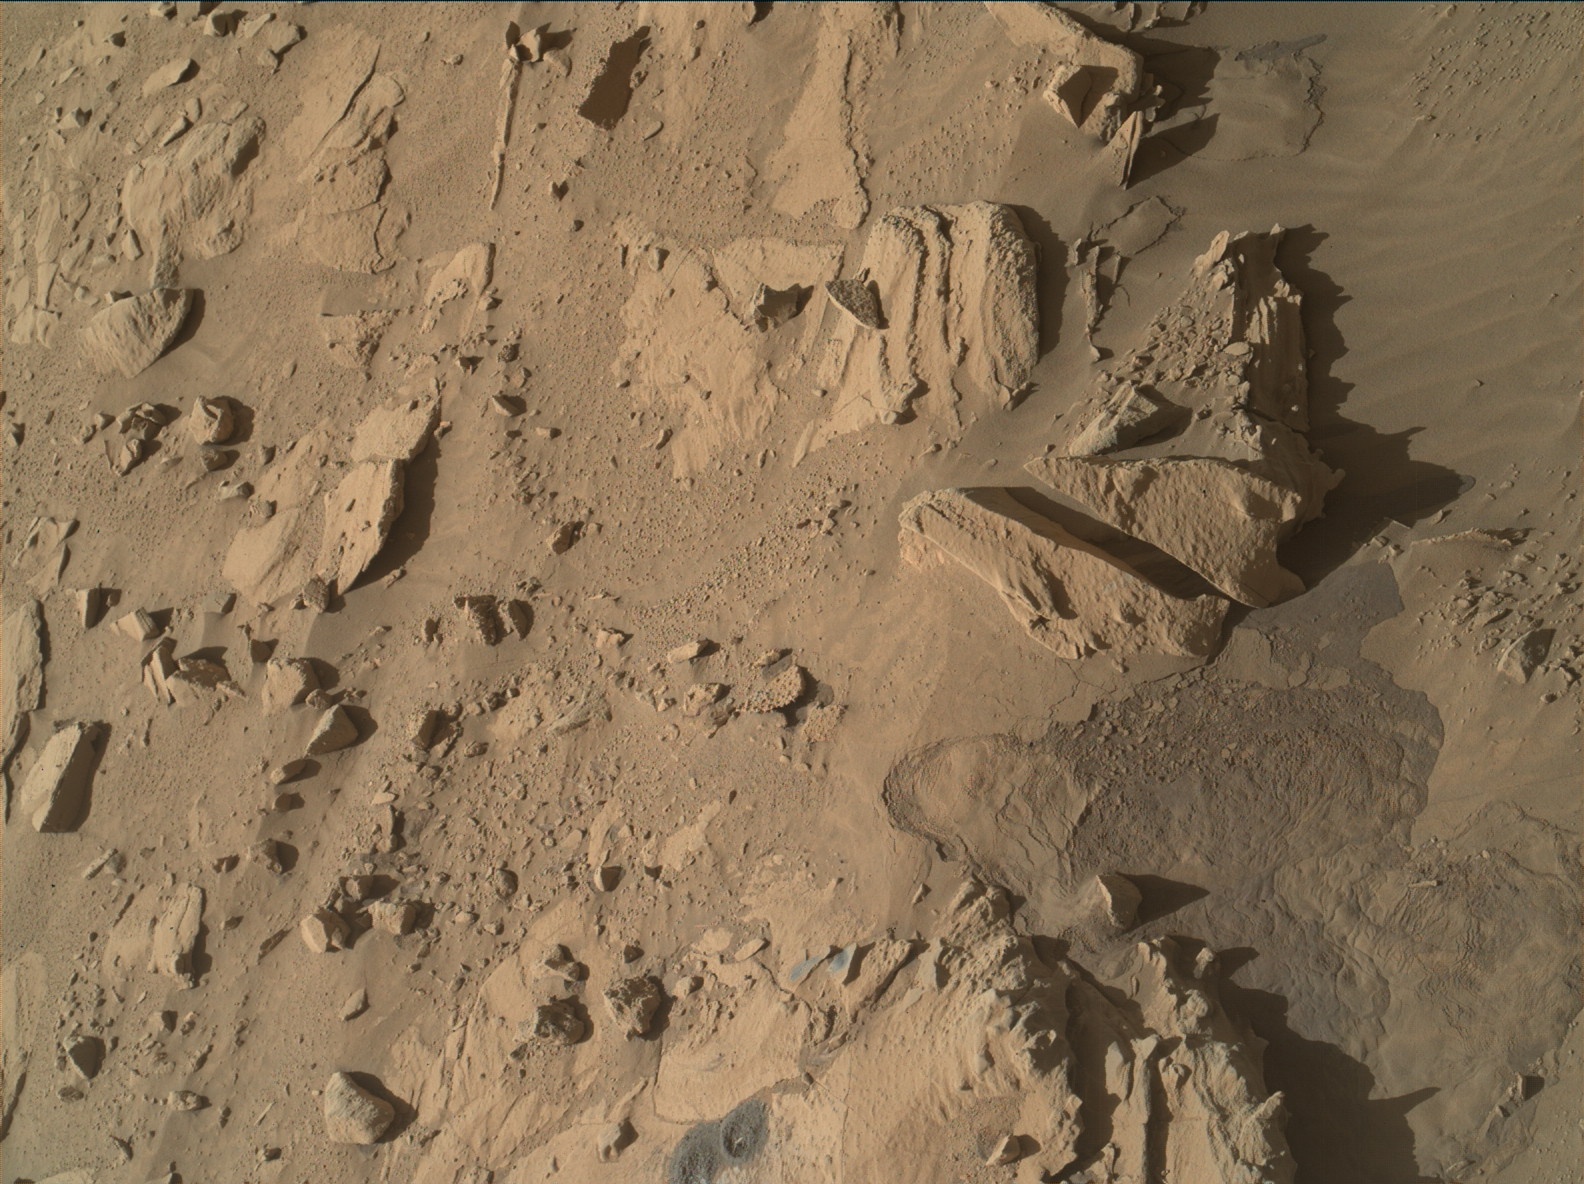 Nasa's Mars rover Curiosity acquired this image using its Mars Hand Lens Imager (MAHLI) on Sol 627, at drive 1330, site number 31